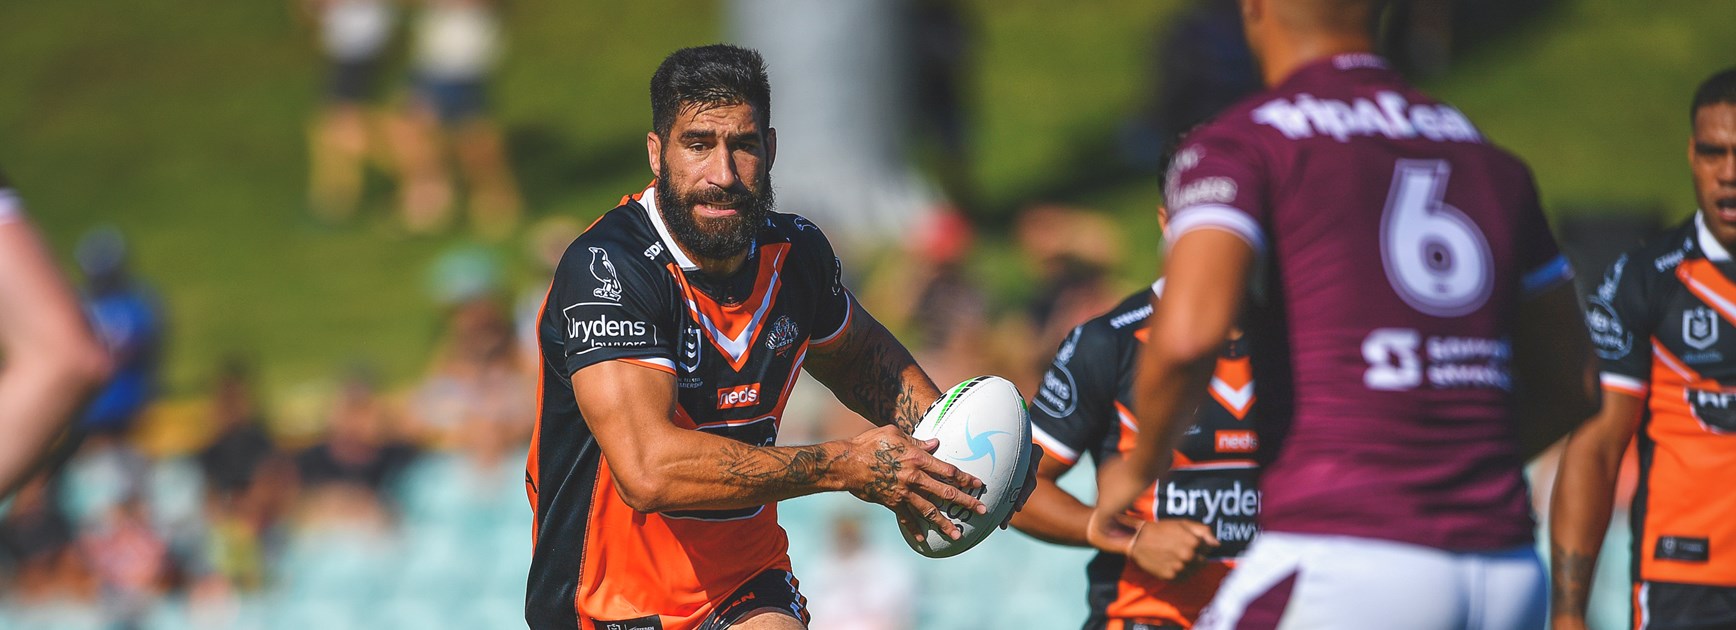 Changing stripes: Tigers' young talent reminds Tamou of Panthers